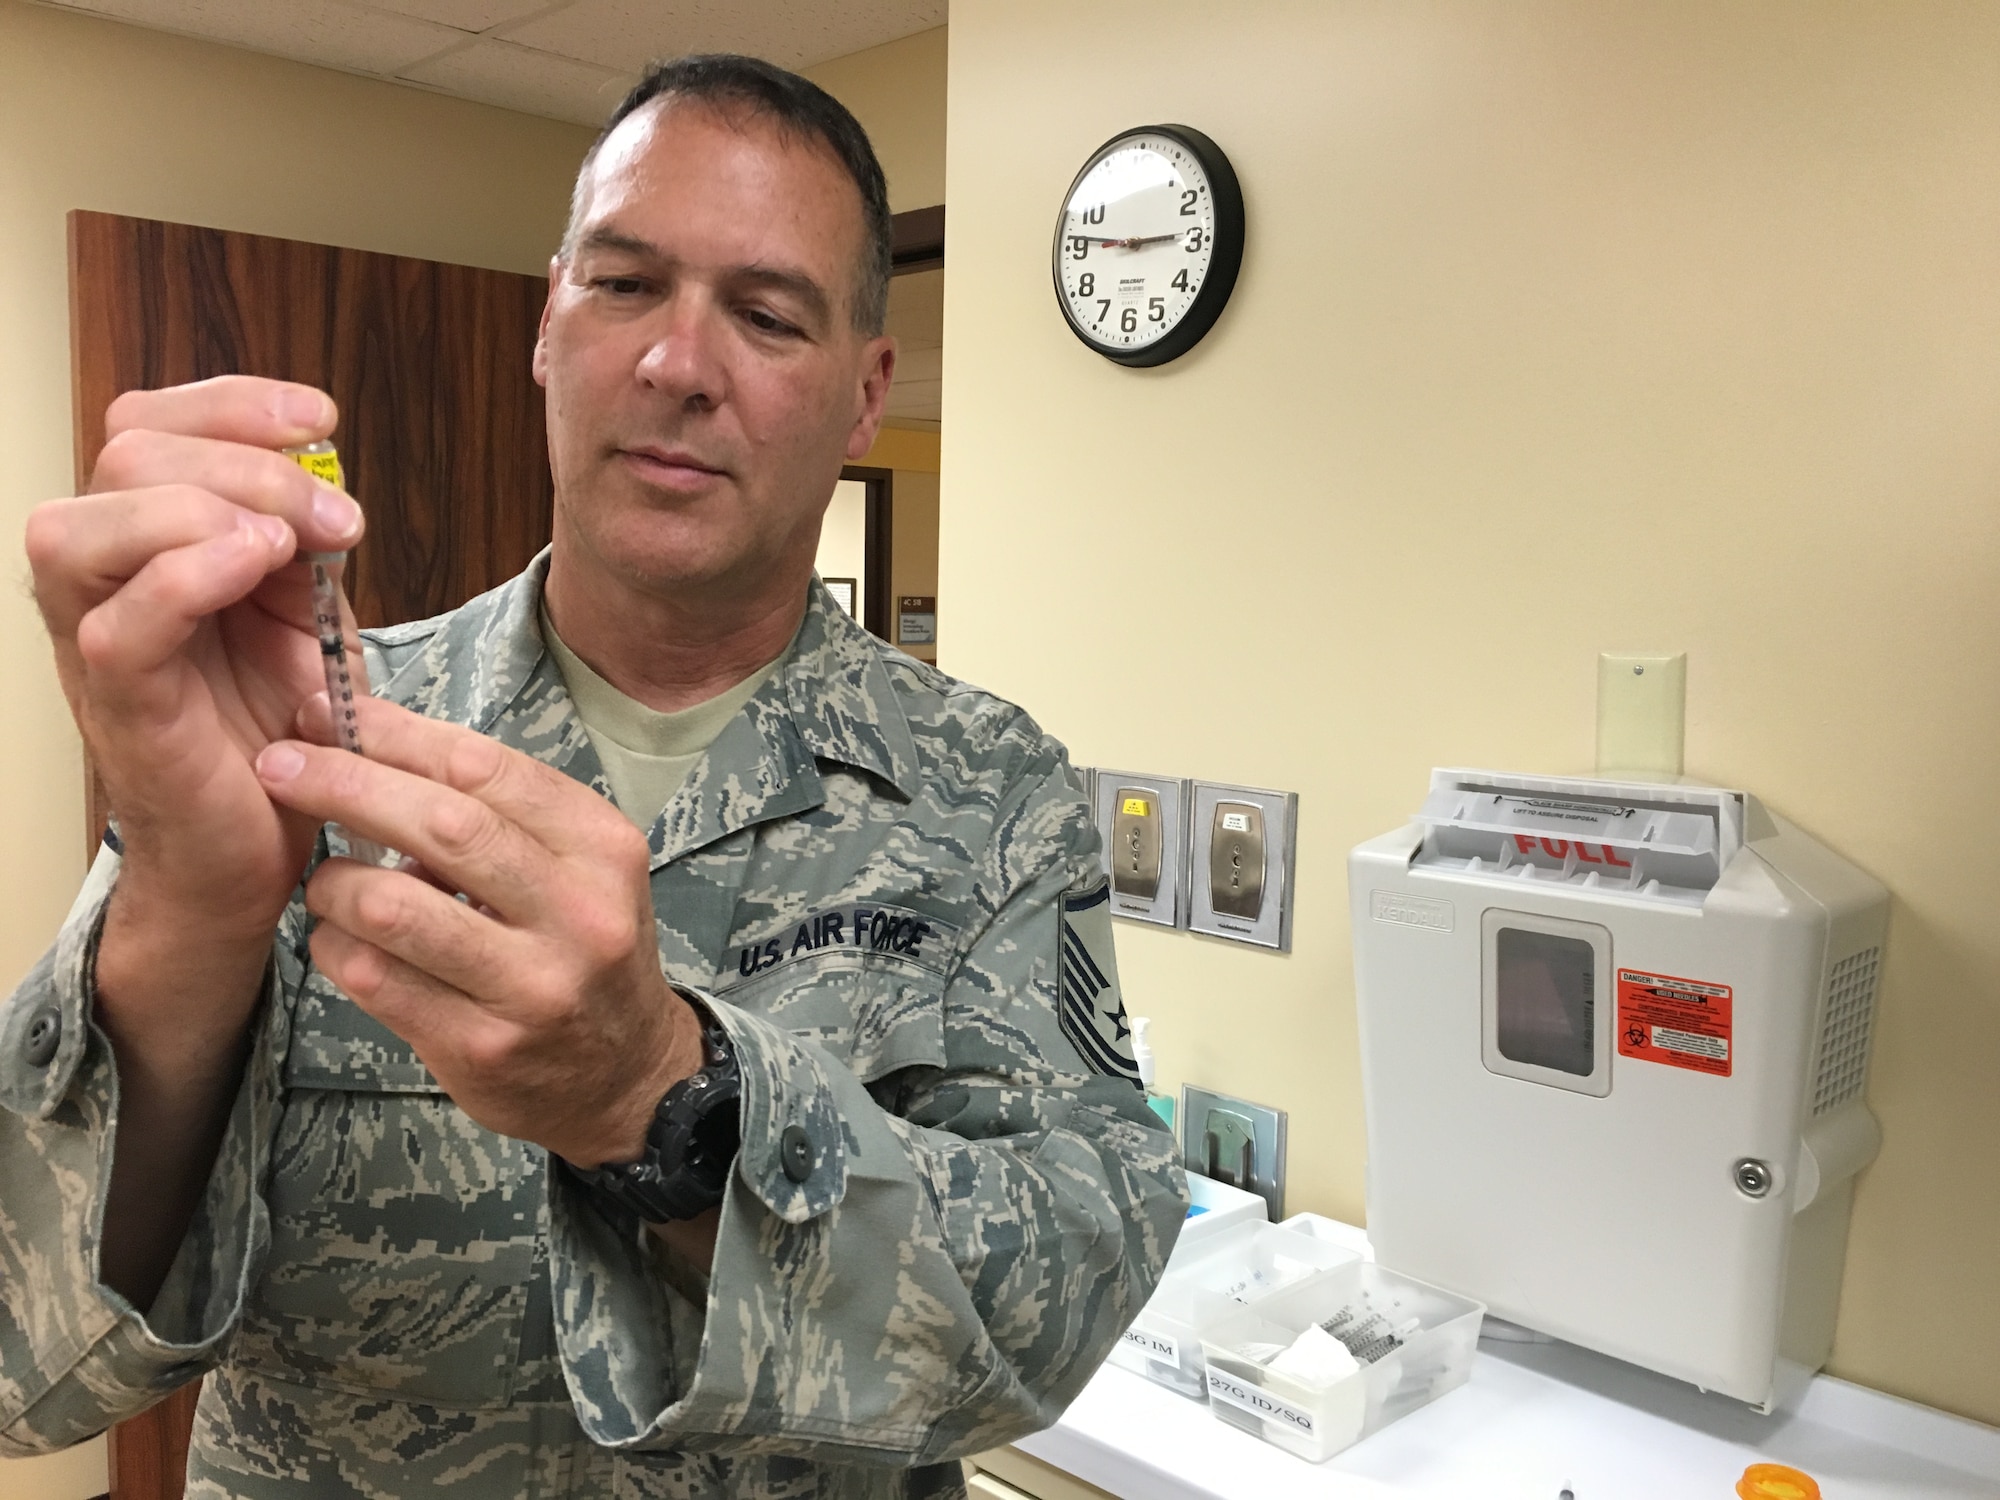 Master Sgt. Kevin Roper, medical technician with the 419th Medical Squadron, administers vaccinations at the Tripler Army Medical Center in Honolulu, Hawaii. Roper spent time preparing patients for procedures and assisting with administration while working at TAMC during his two-week annual training, honing his techniques and completing required medical skills refresher training. Roper also worked in the gastroenterology section where he worked with up to 11 patients a day. (U.S. Air Force photo/Staff Sgt. Christina Judd)